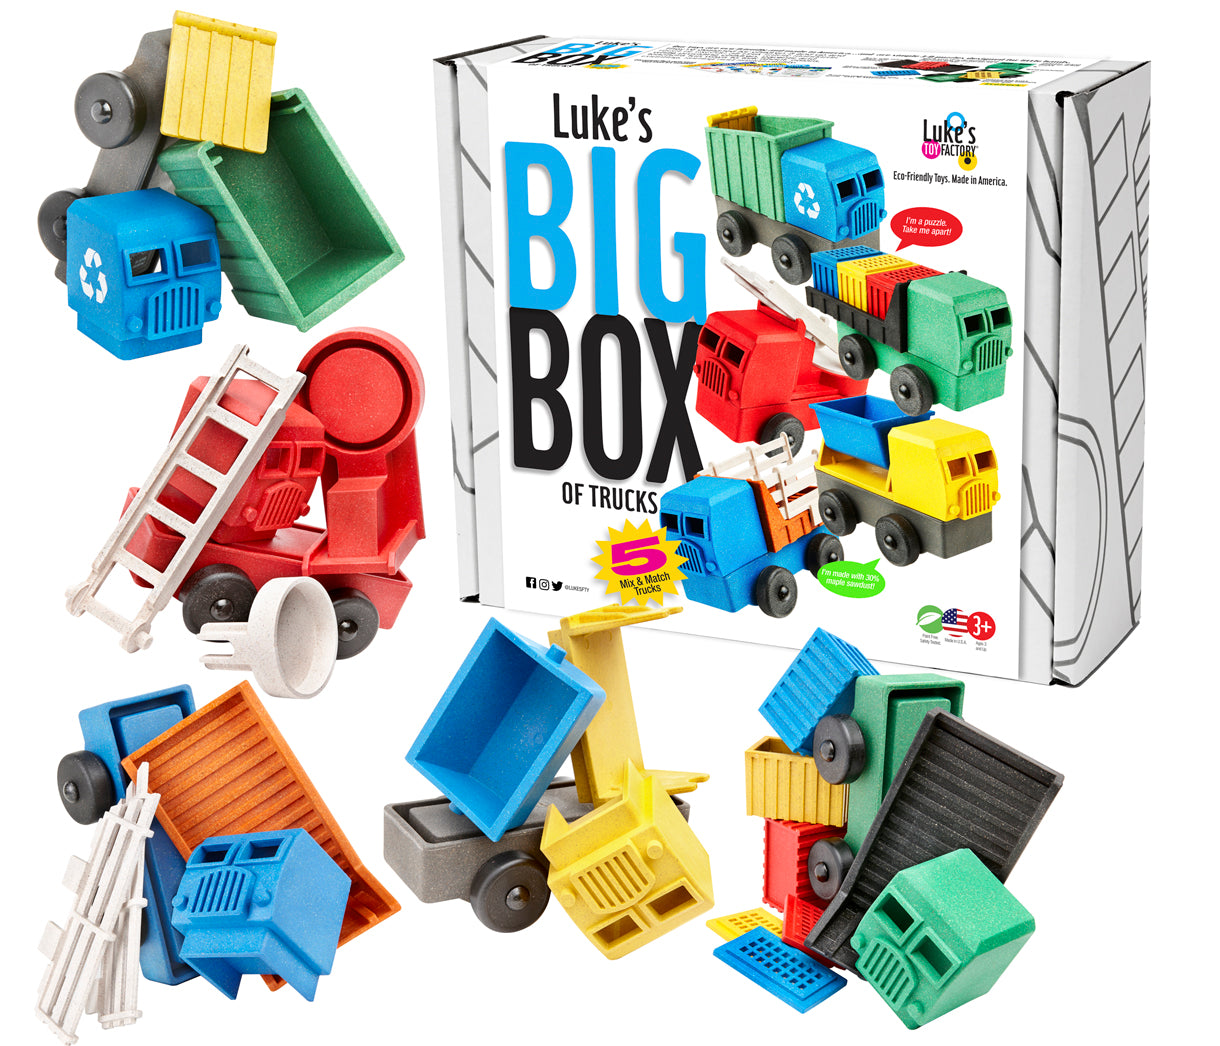 Luke's Big Box of Toy Trucks with five truck toys for preschool aged kids